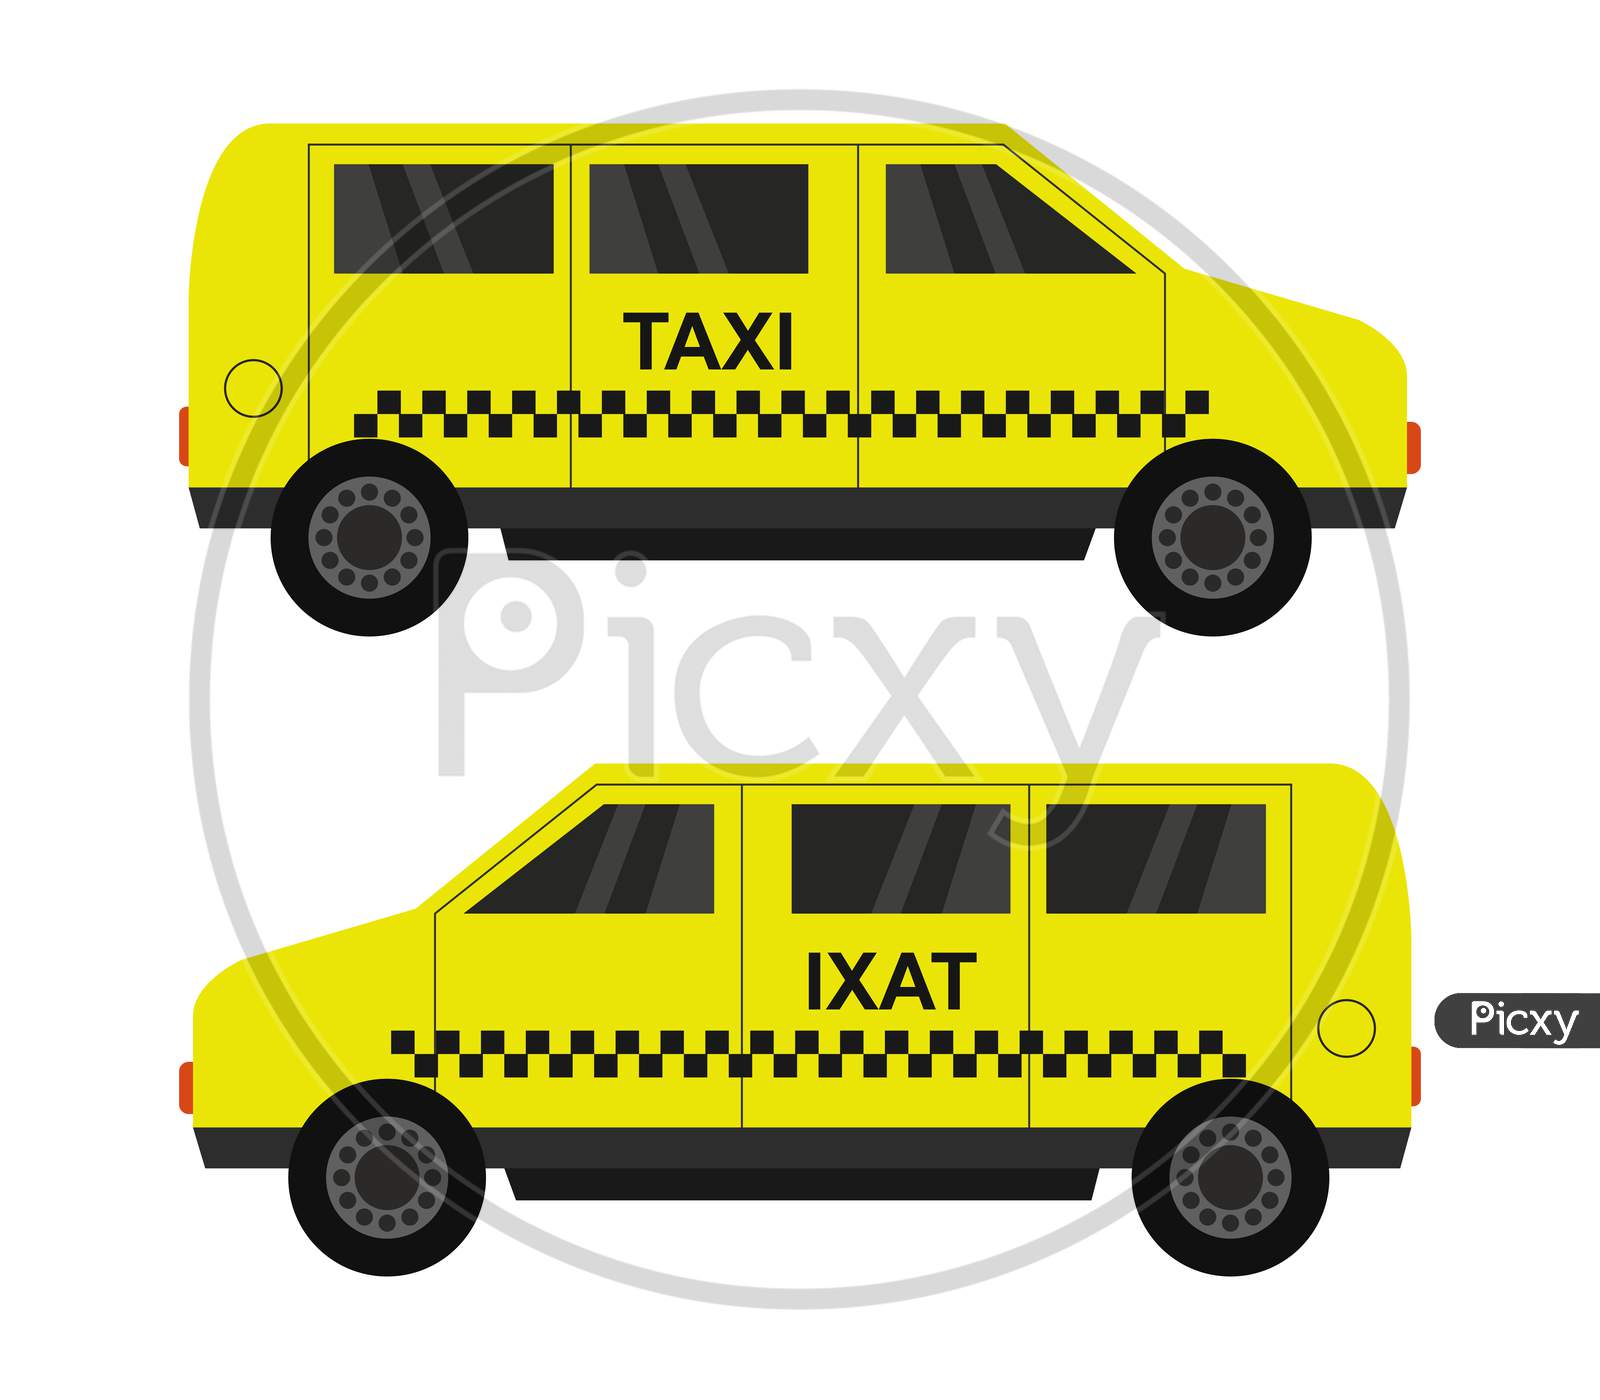 Taxi Van Icon Illustrated In Vector On White Background